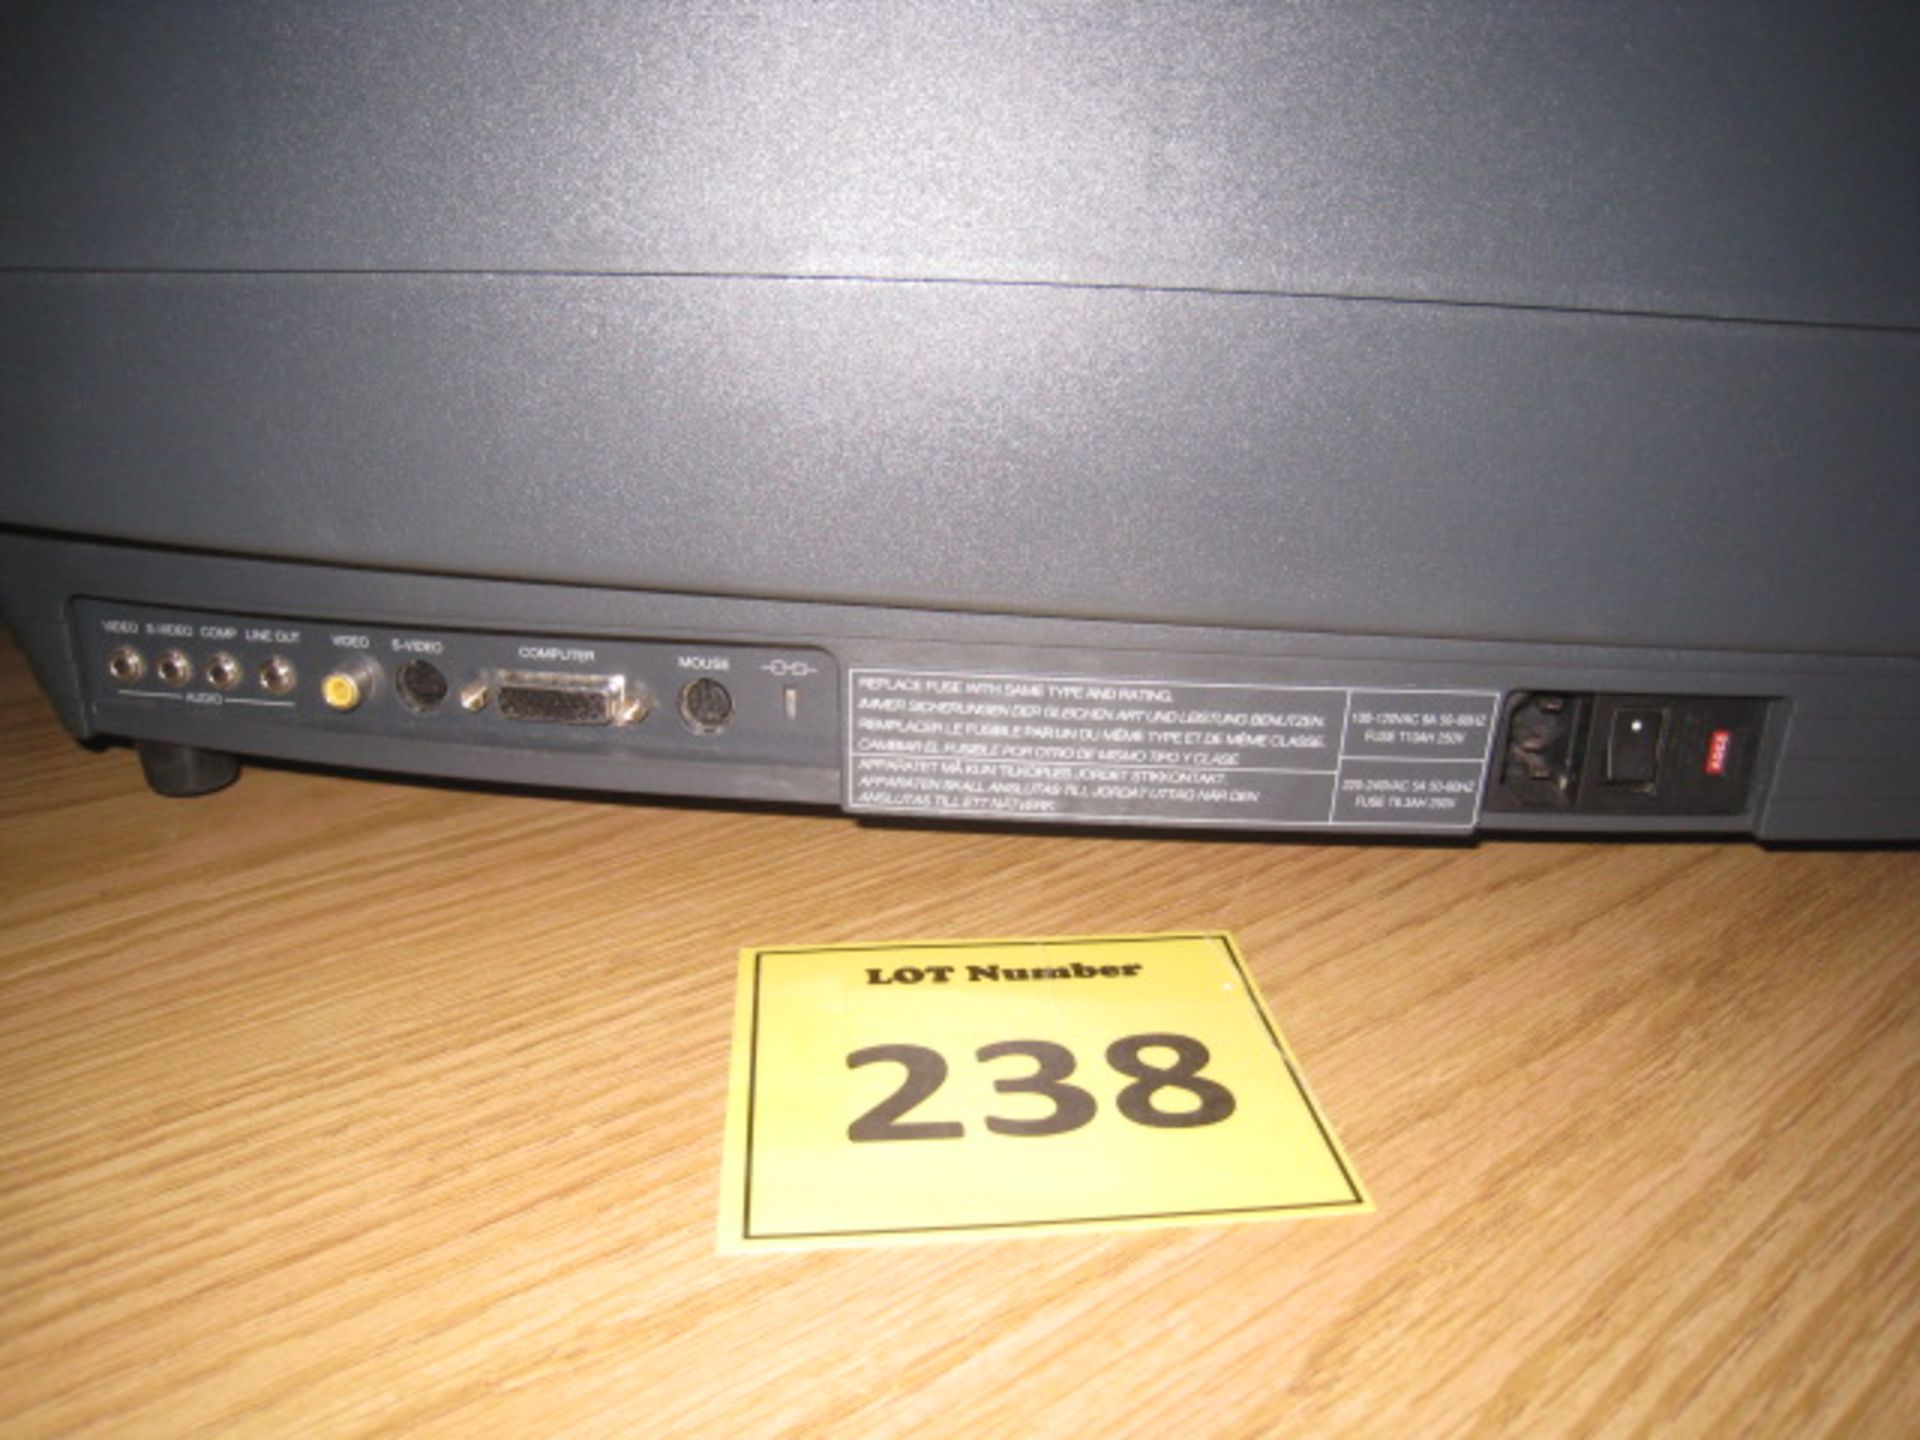 ASK IMPRESSION 880 PROJECTOR WITH REMOTE CONTROL. WORKING BUT CRACK IN CASE. SEE PHOTO - Image 4 of 4